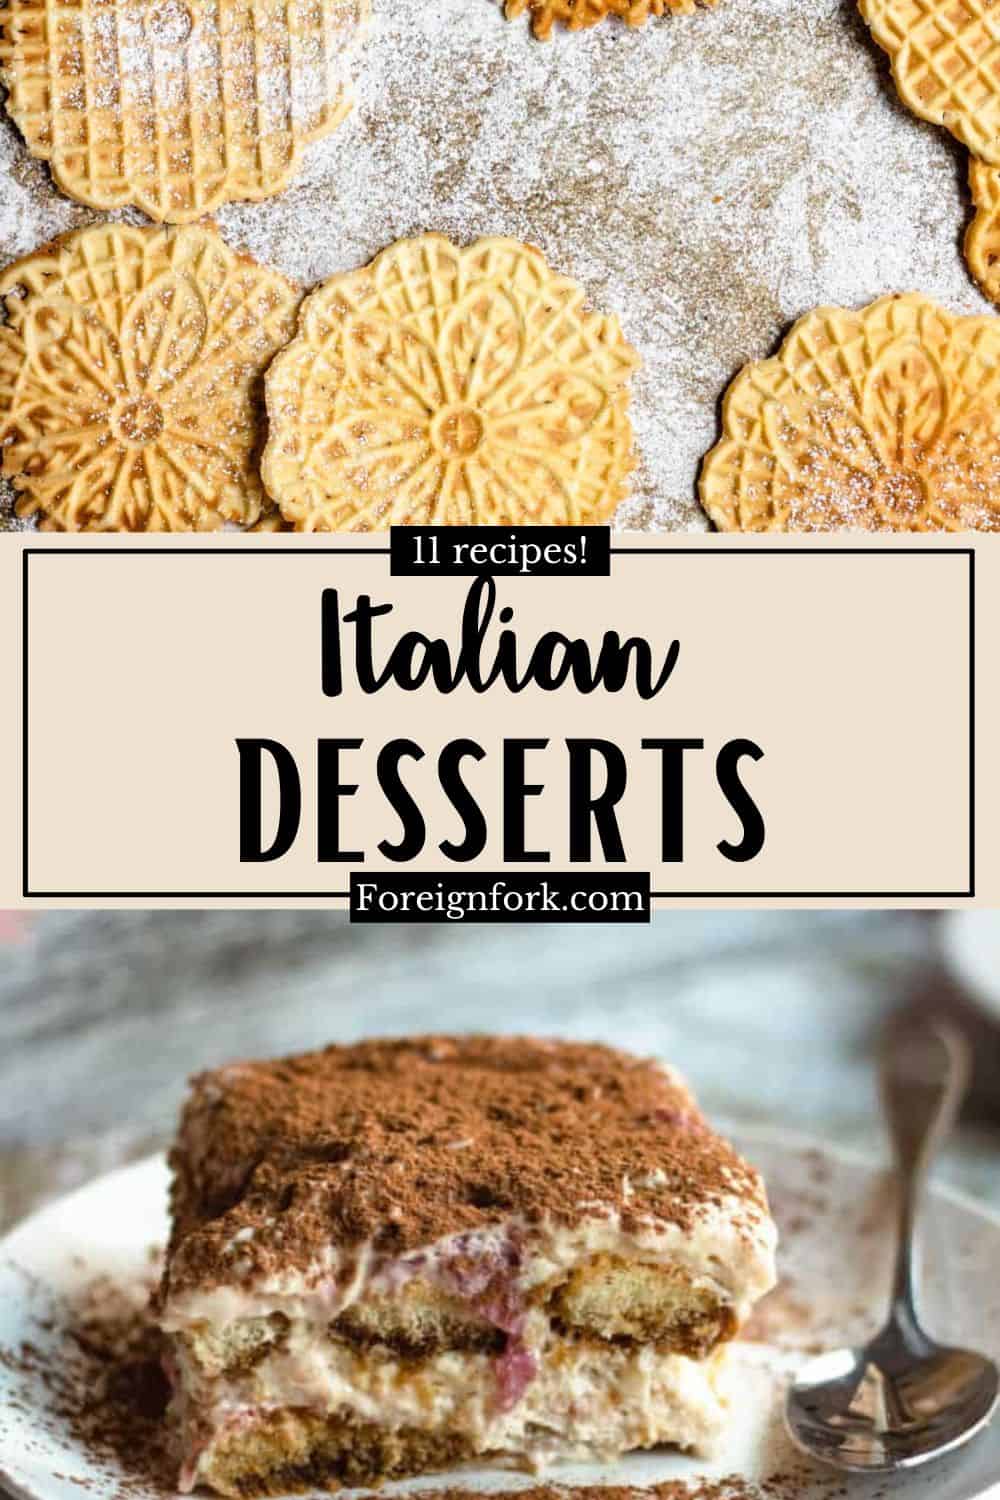 A Pinterest image for 11 Italian Dessert recipes with a collage of photos.